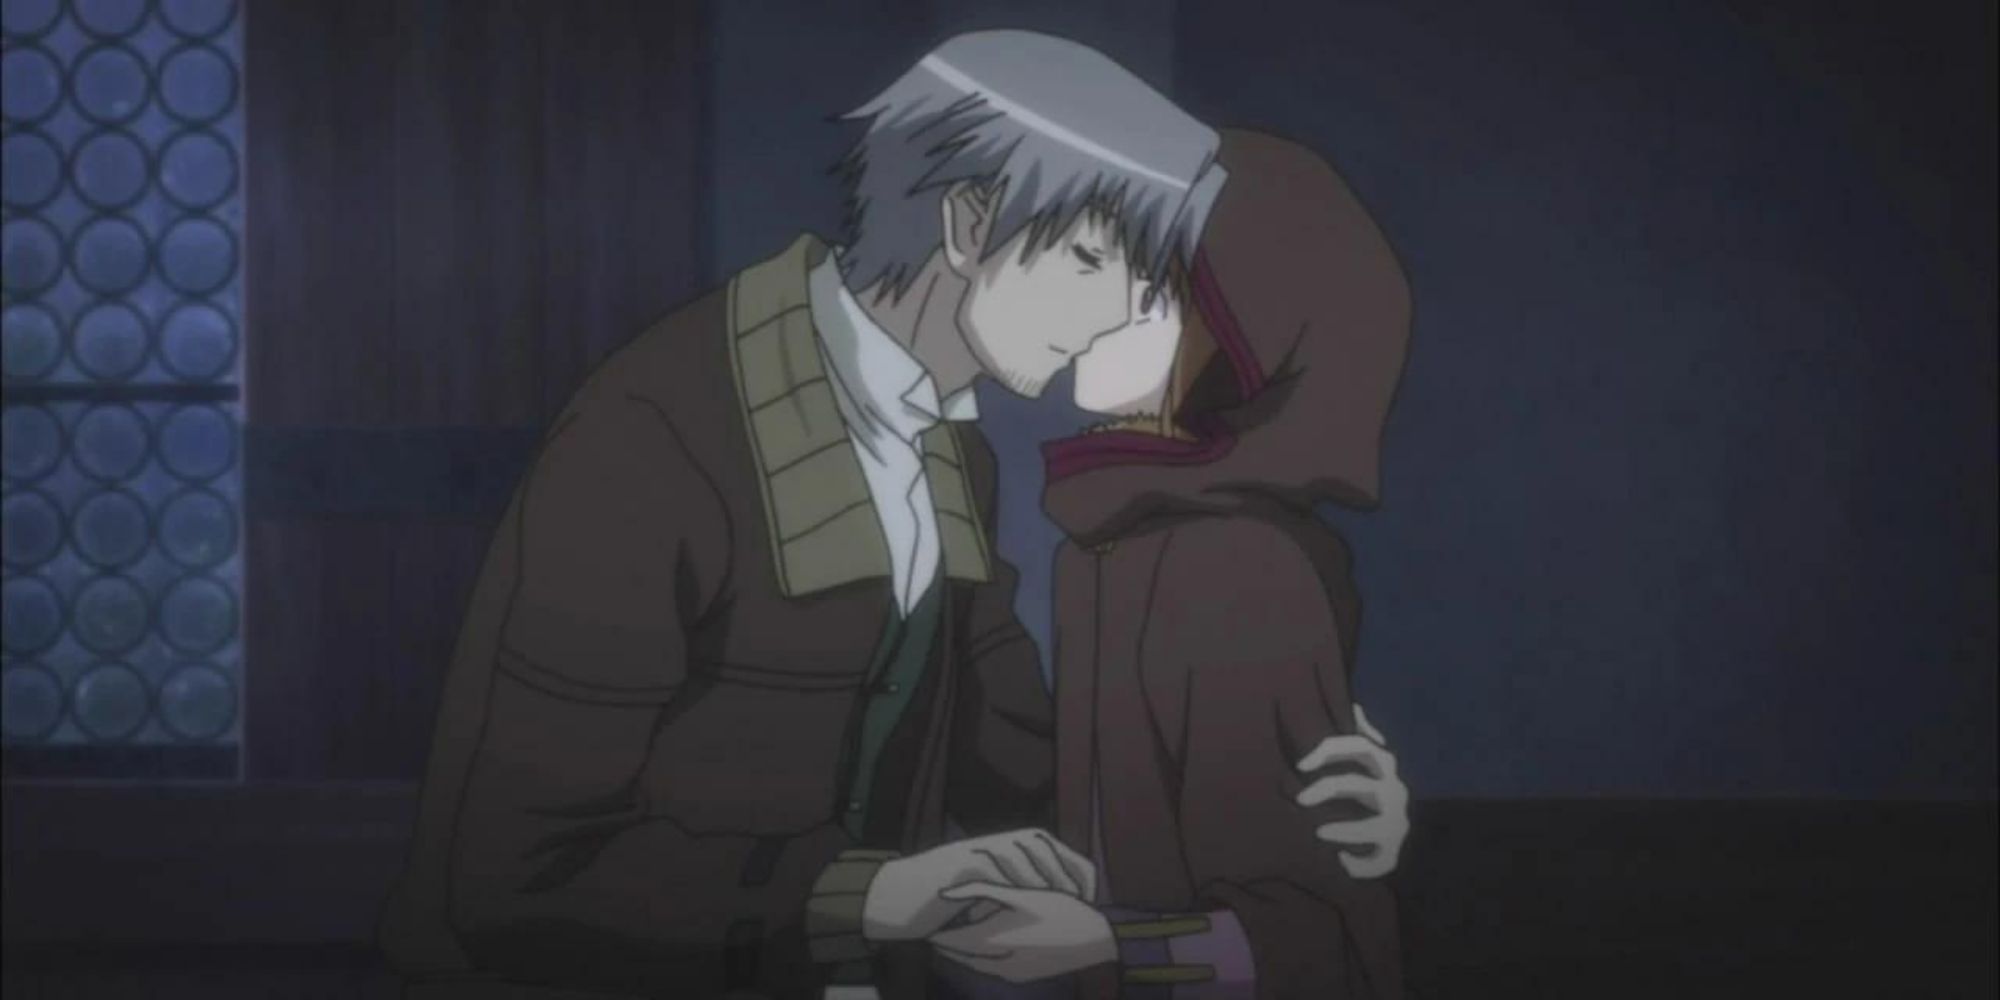 Holo and Lawrence kiss in Spice and Wolf II